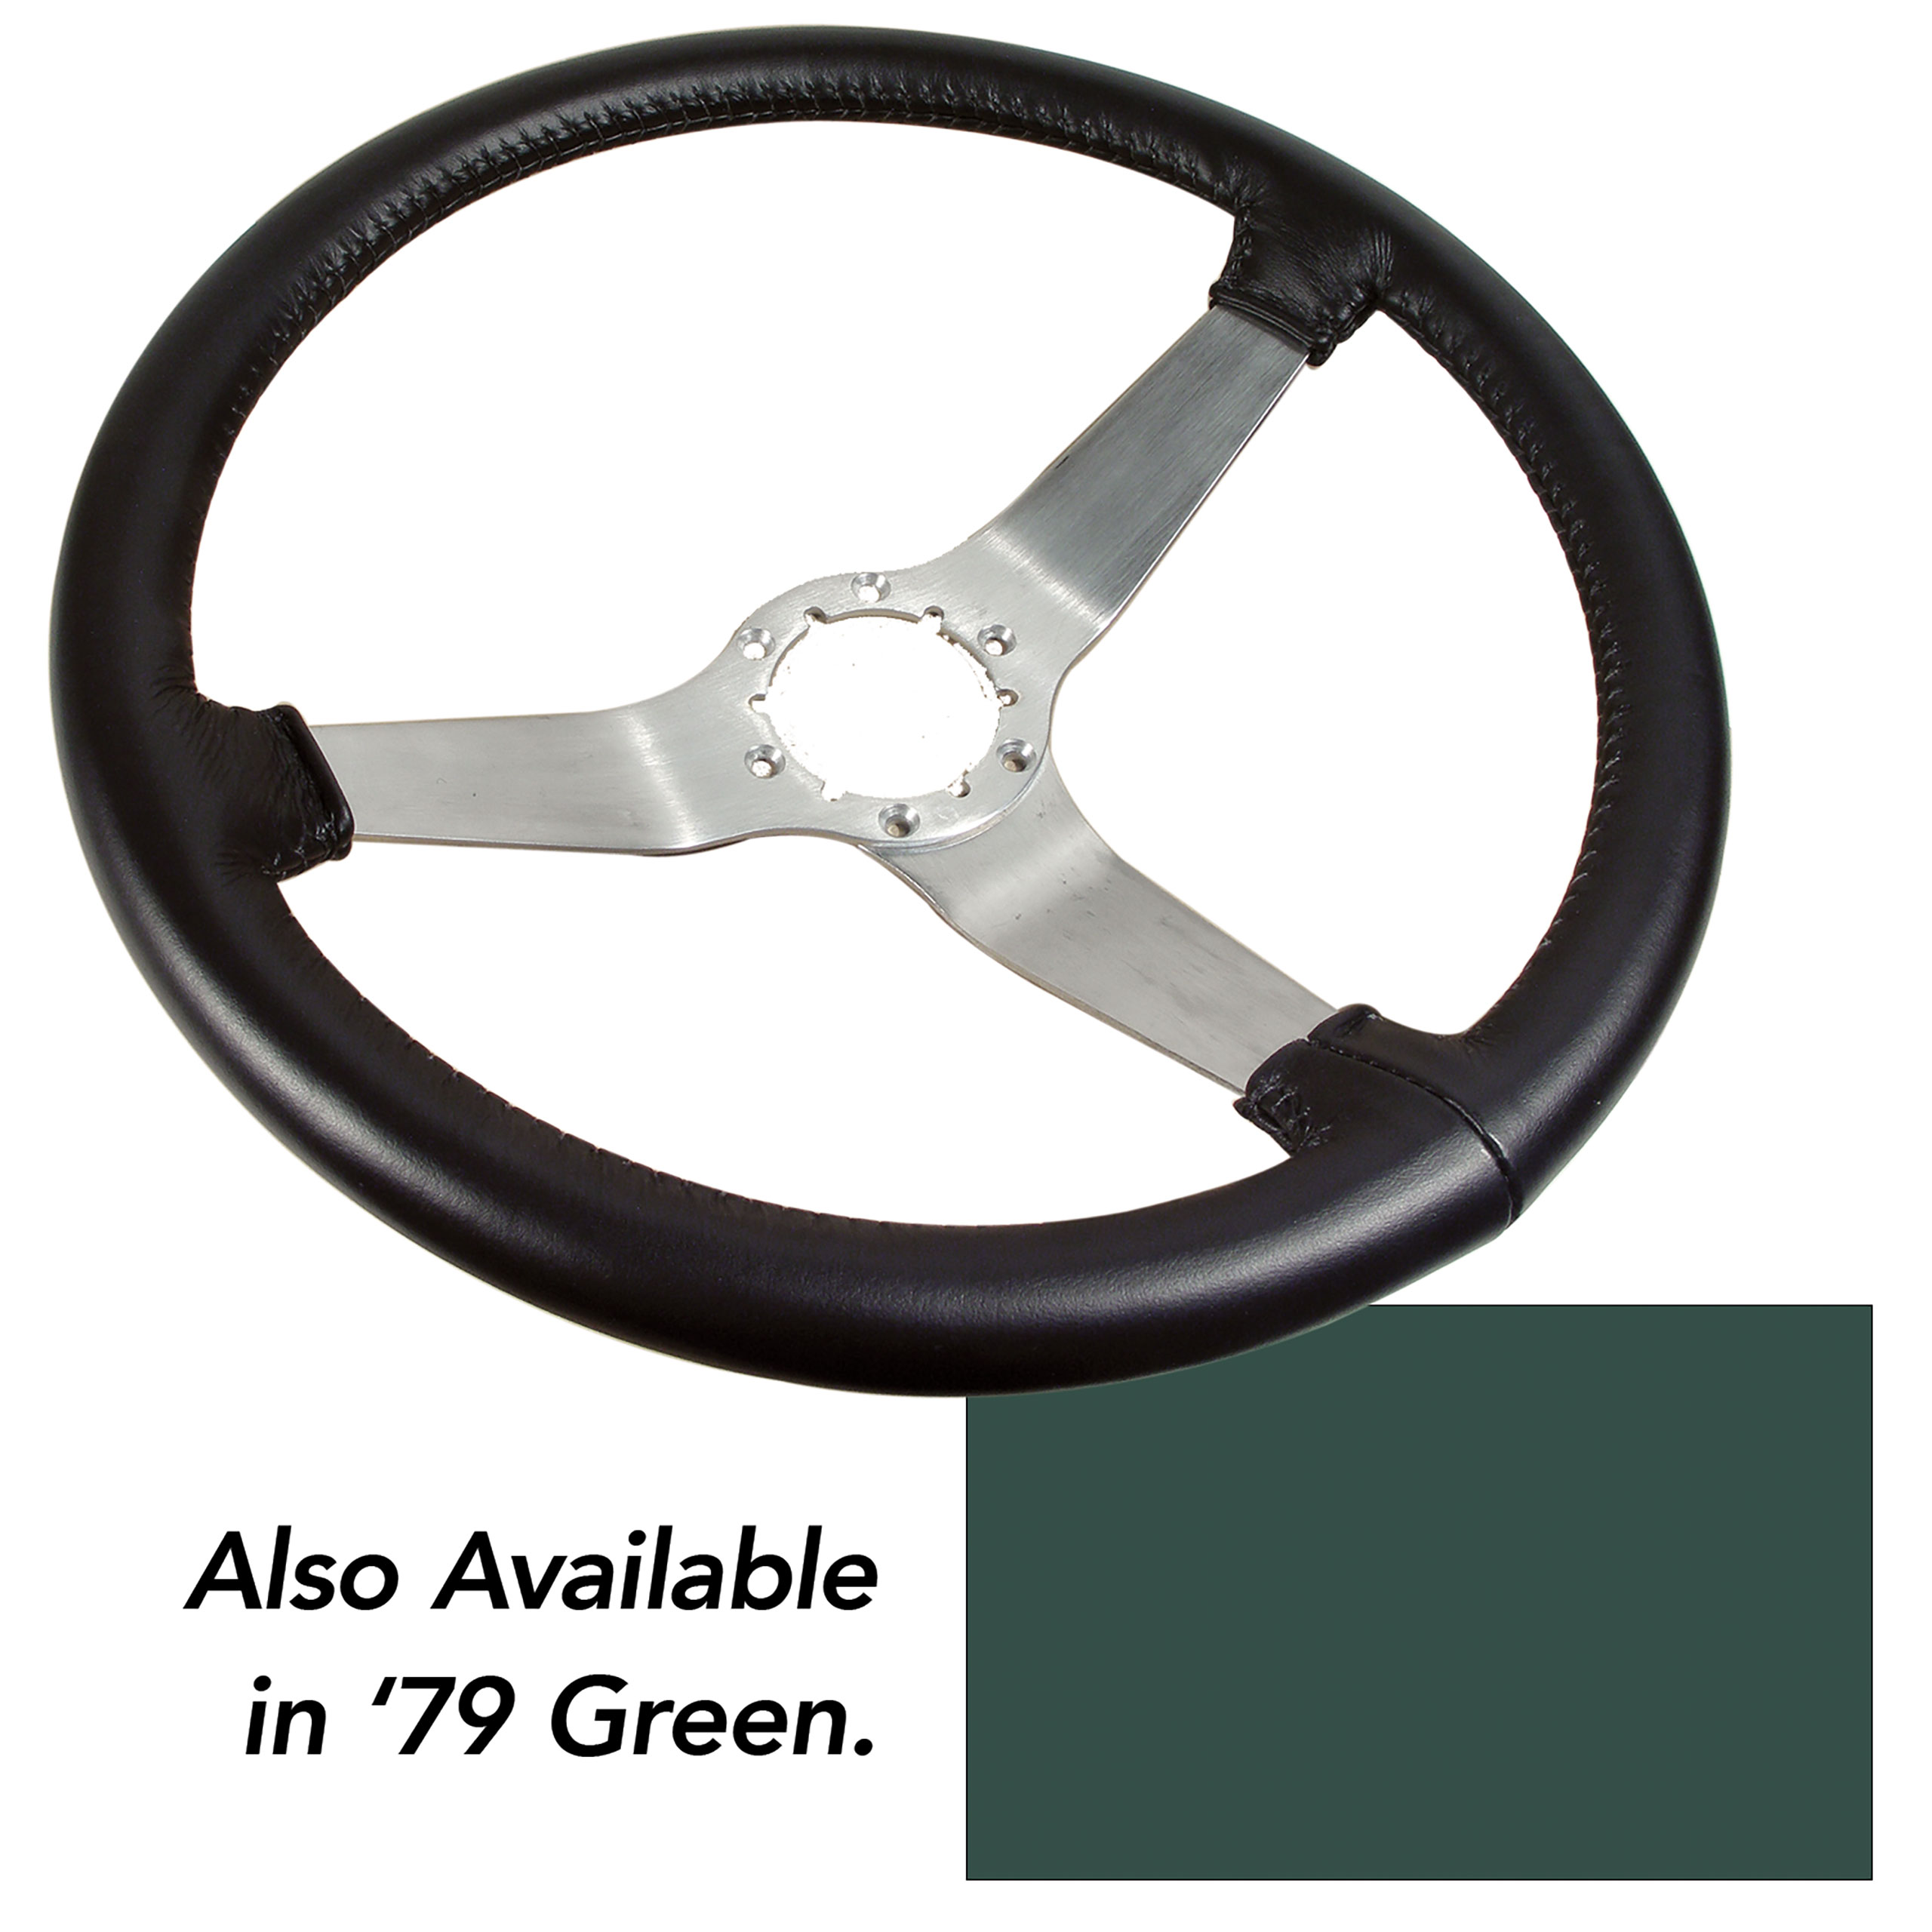 C3 1977-1982 Chevrolet Corvette Reproduction Leather Wrapped Steering Wheels - Choose Factory Color & Spoke Style - CA